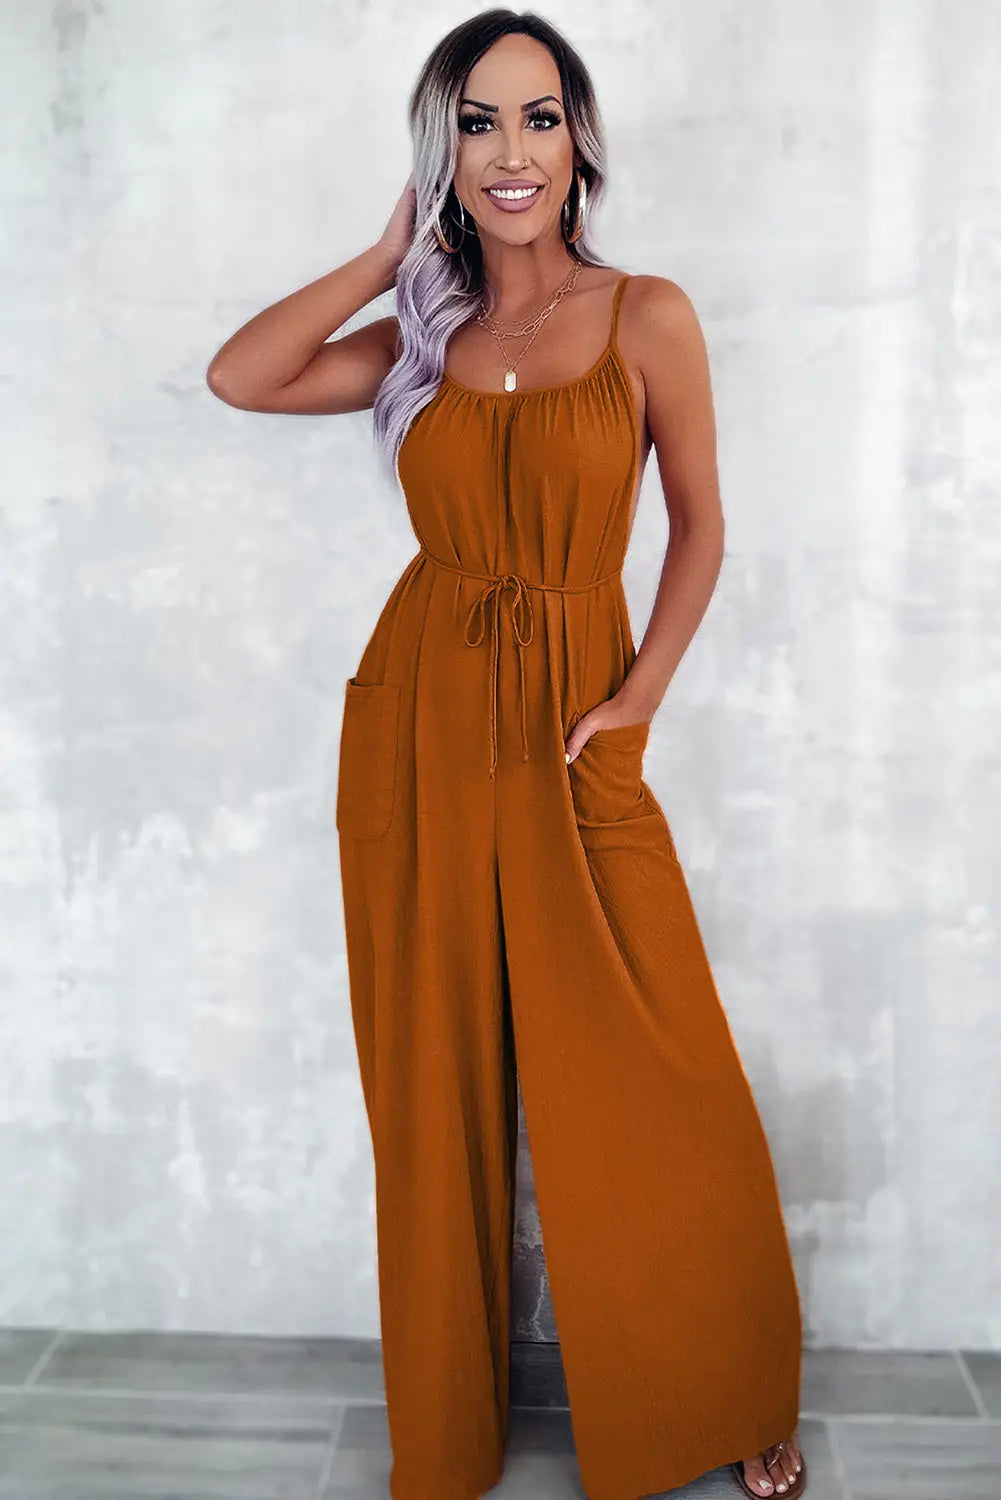 Chestnut spaghetti straps waist tie wide leg jumpsuit with pockets - jumpsuits & rompers